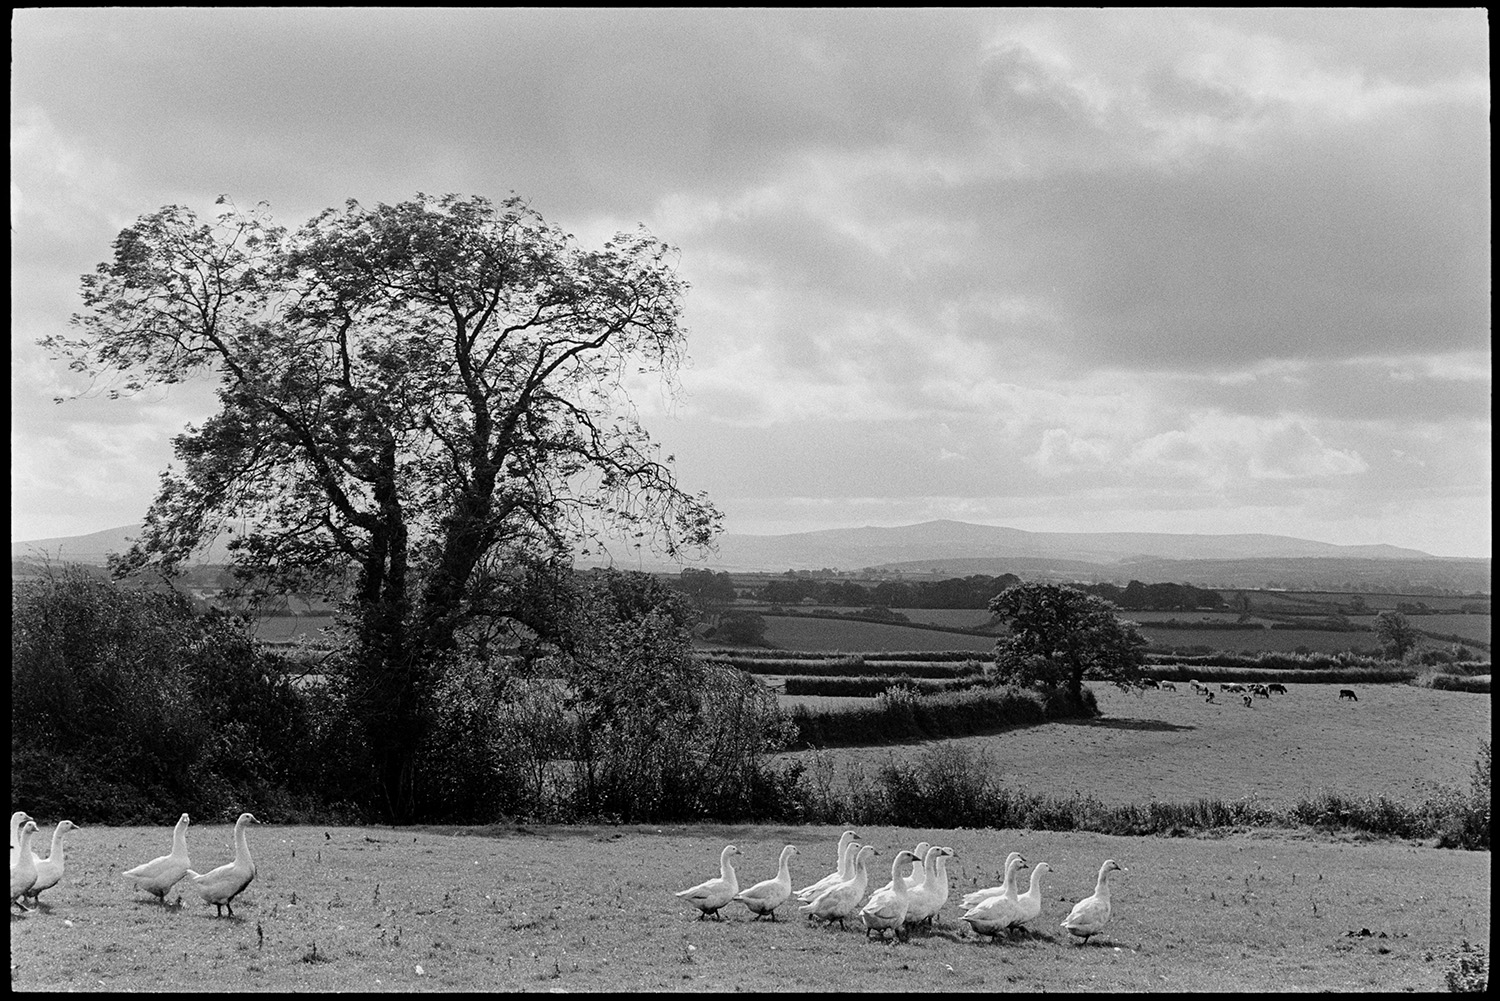 Landscape with flock of sheep and geese. 
[A flock of geese walking through a field at Ingleigh Green. A landscape of hedgerows, trees and fields with cattle grazing is visible in the background.]